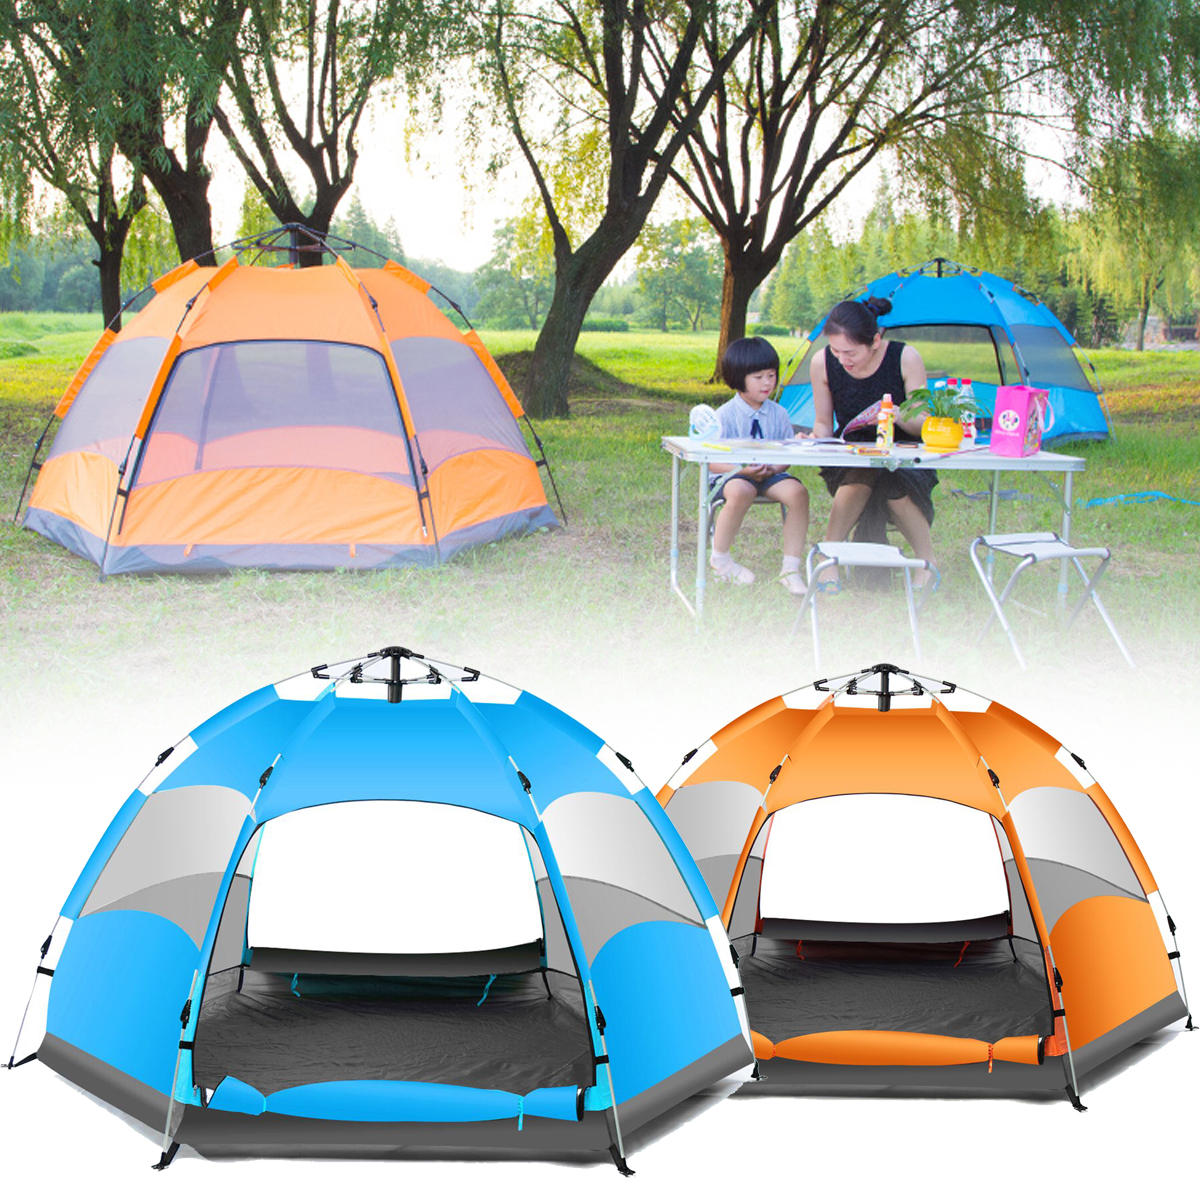 Outdoor 3-4 Persons Automatic Camping Tent Waterproof Double Layer UV Beach Sunshade Canopy